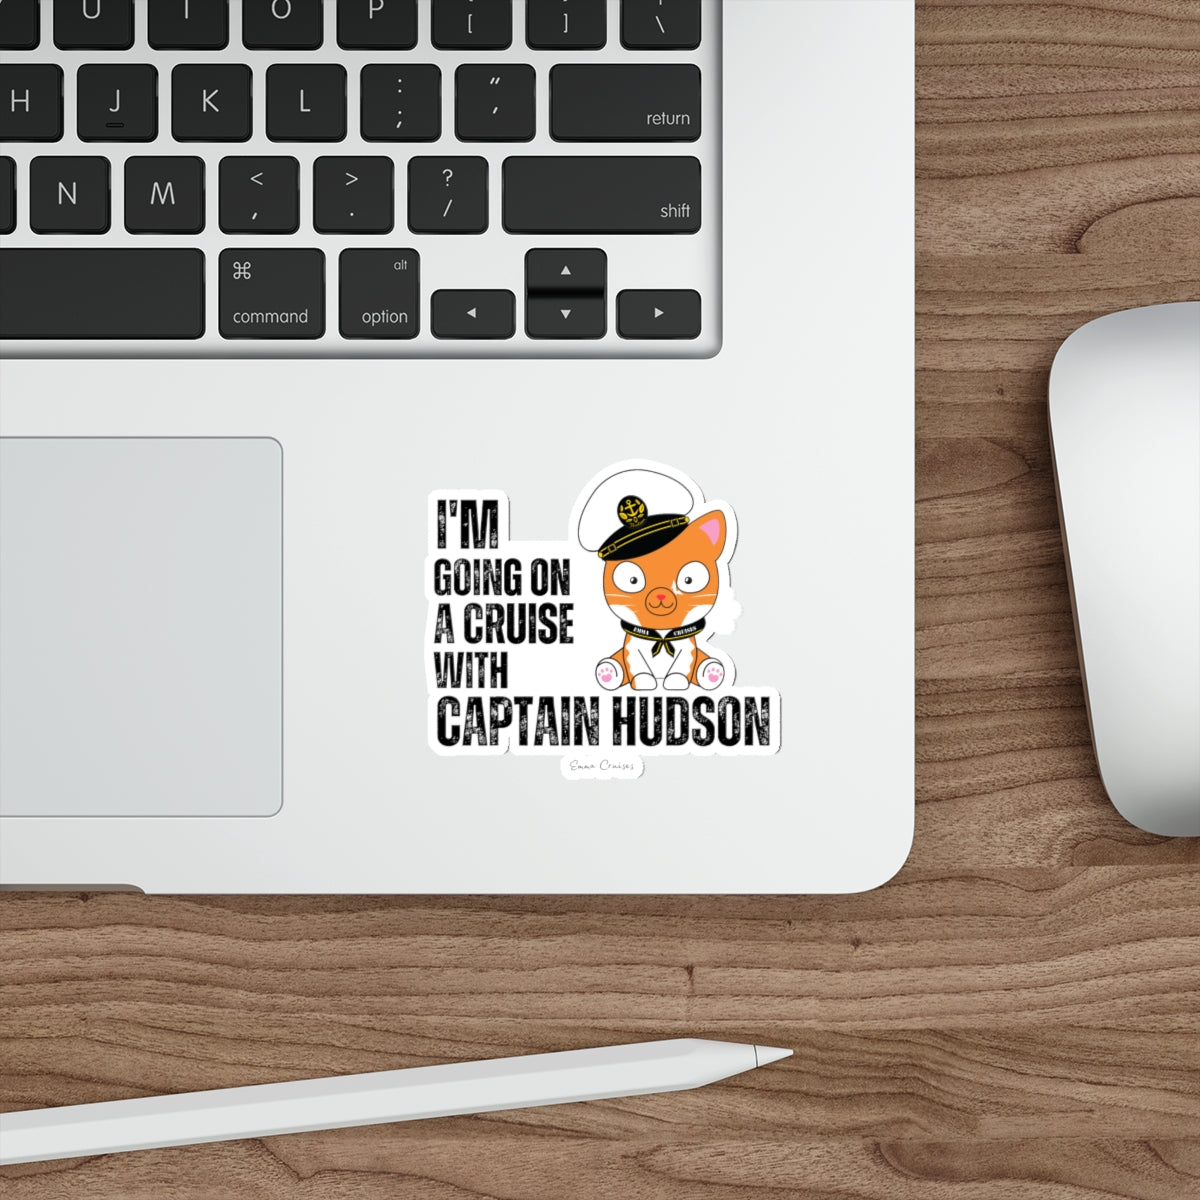 I'm Going On a Cruise With Captain Hudson - Die-Cut Sticker